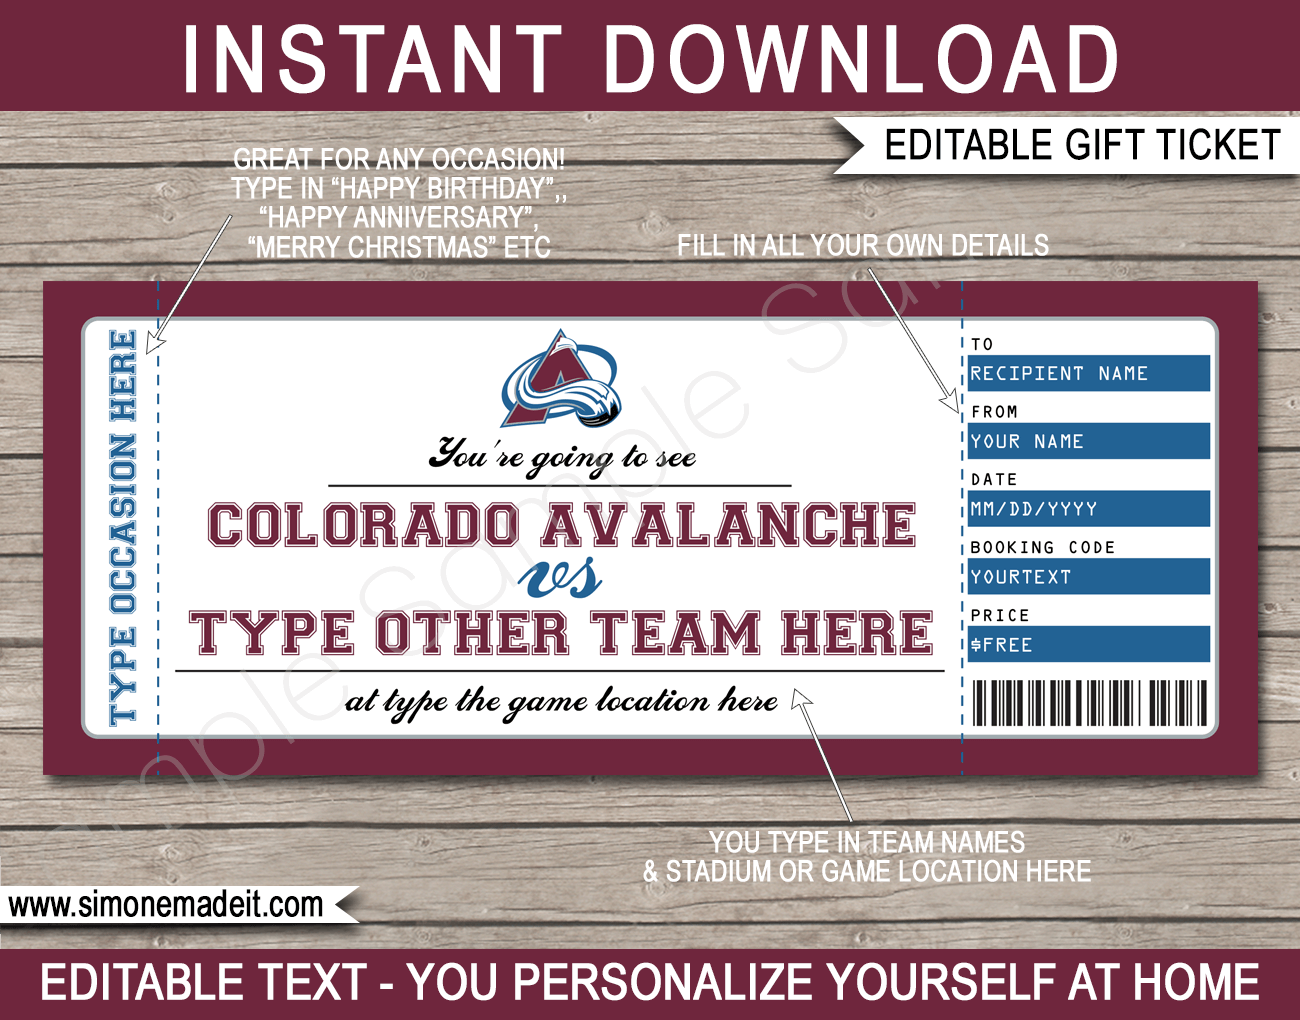 nhl avalanche tickets off 61% - www 